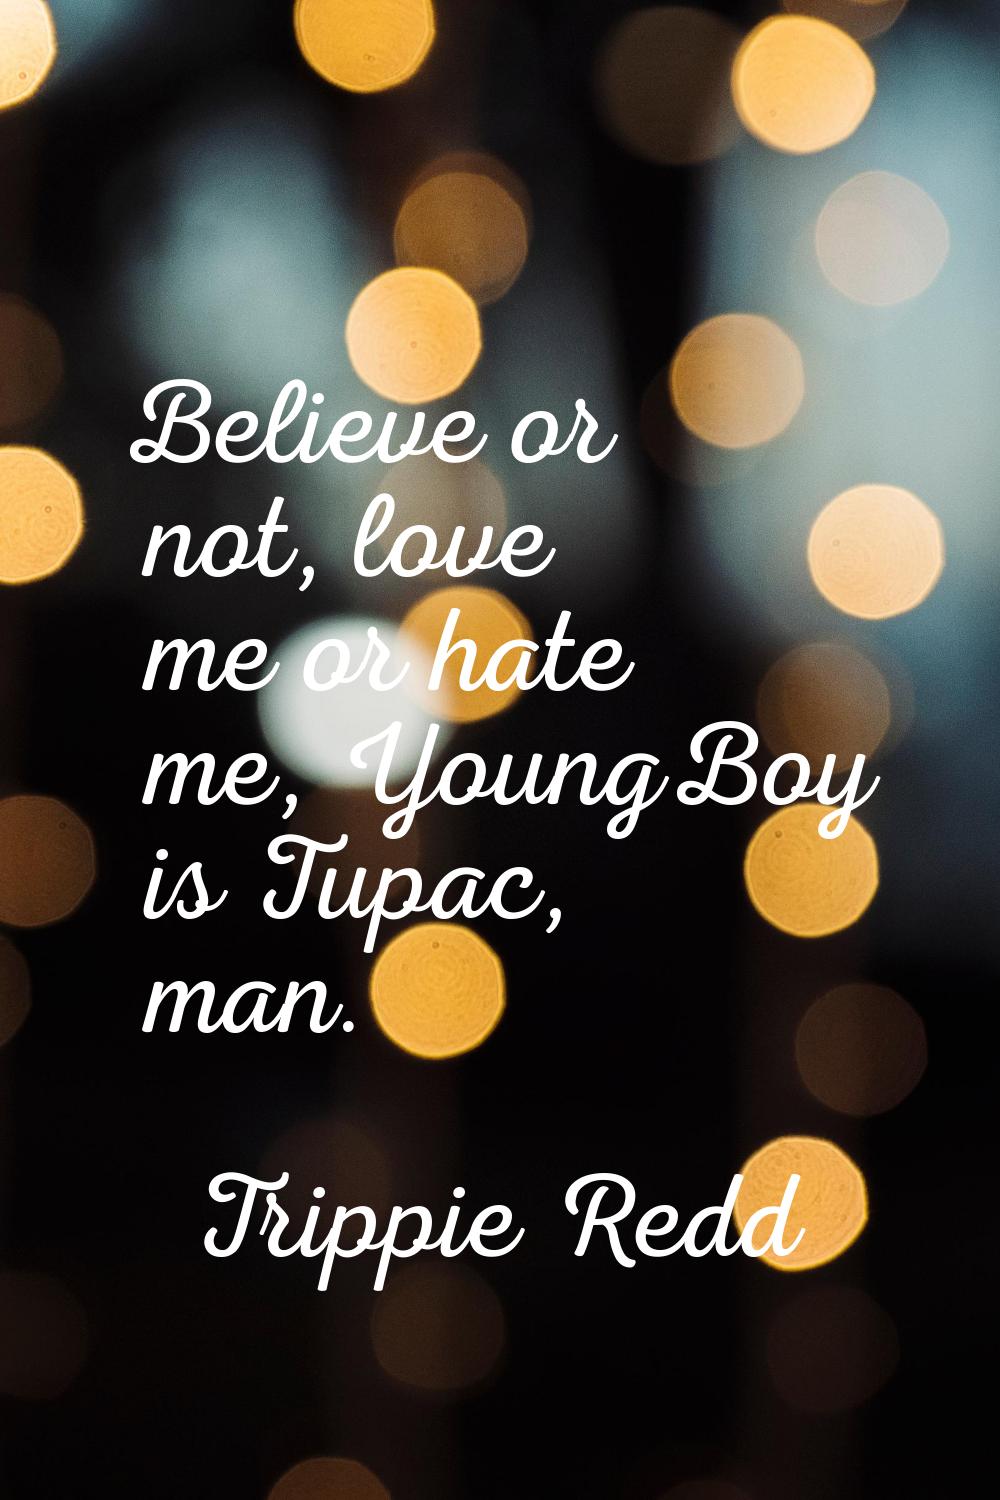 Believe or not, love me or hate me, YoungBoy is Tupac, man.